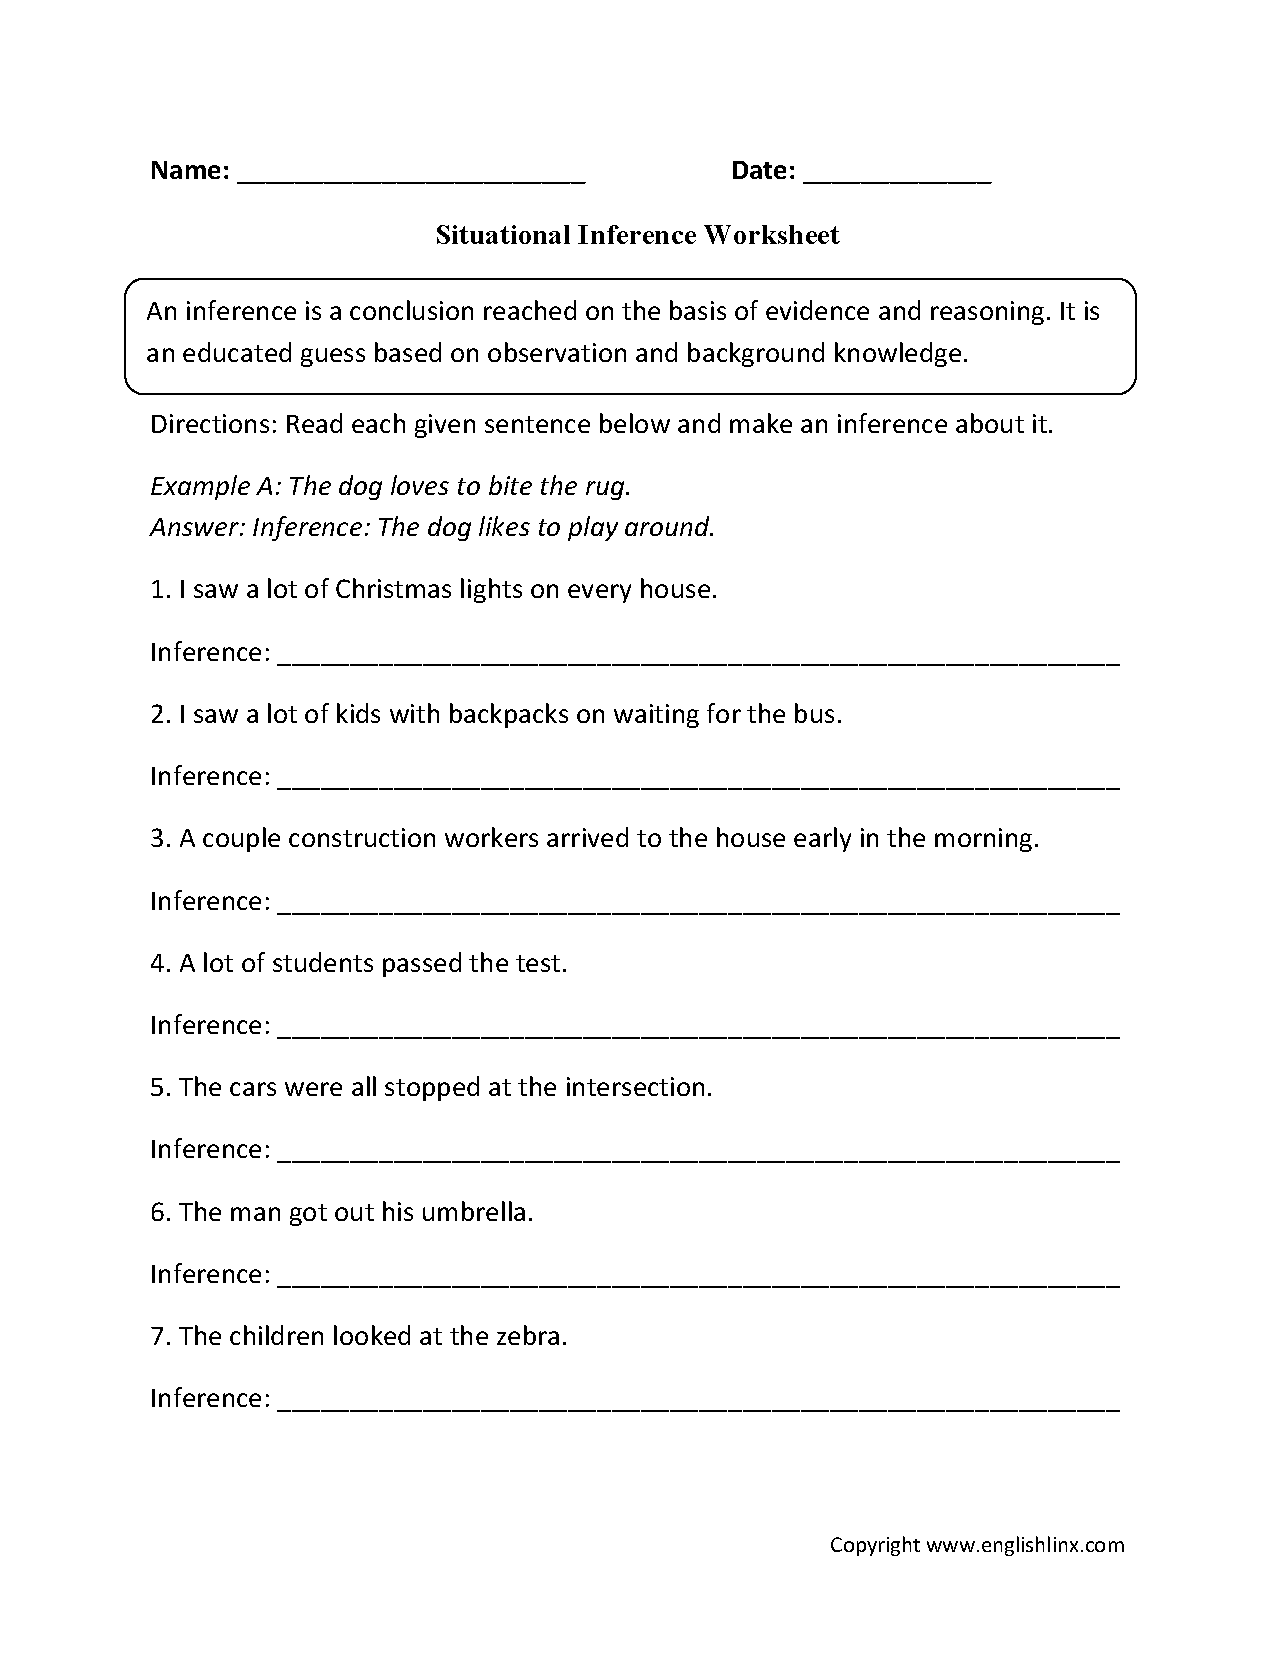 Situational Inference Worksheets